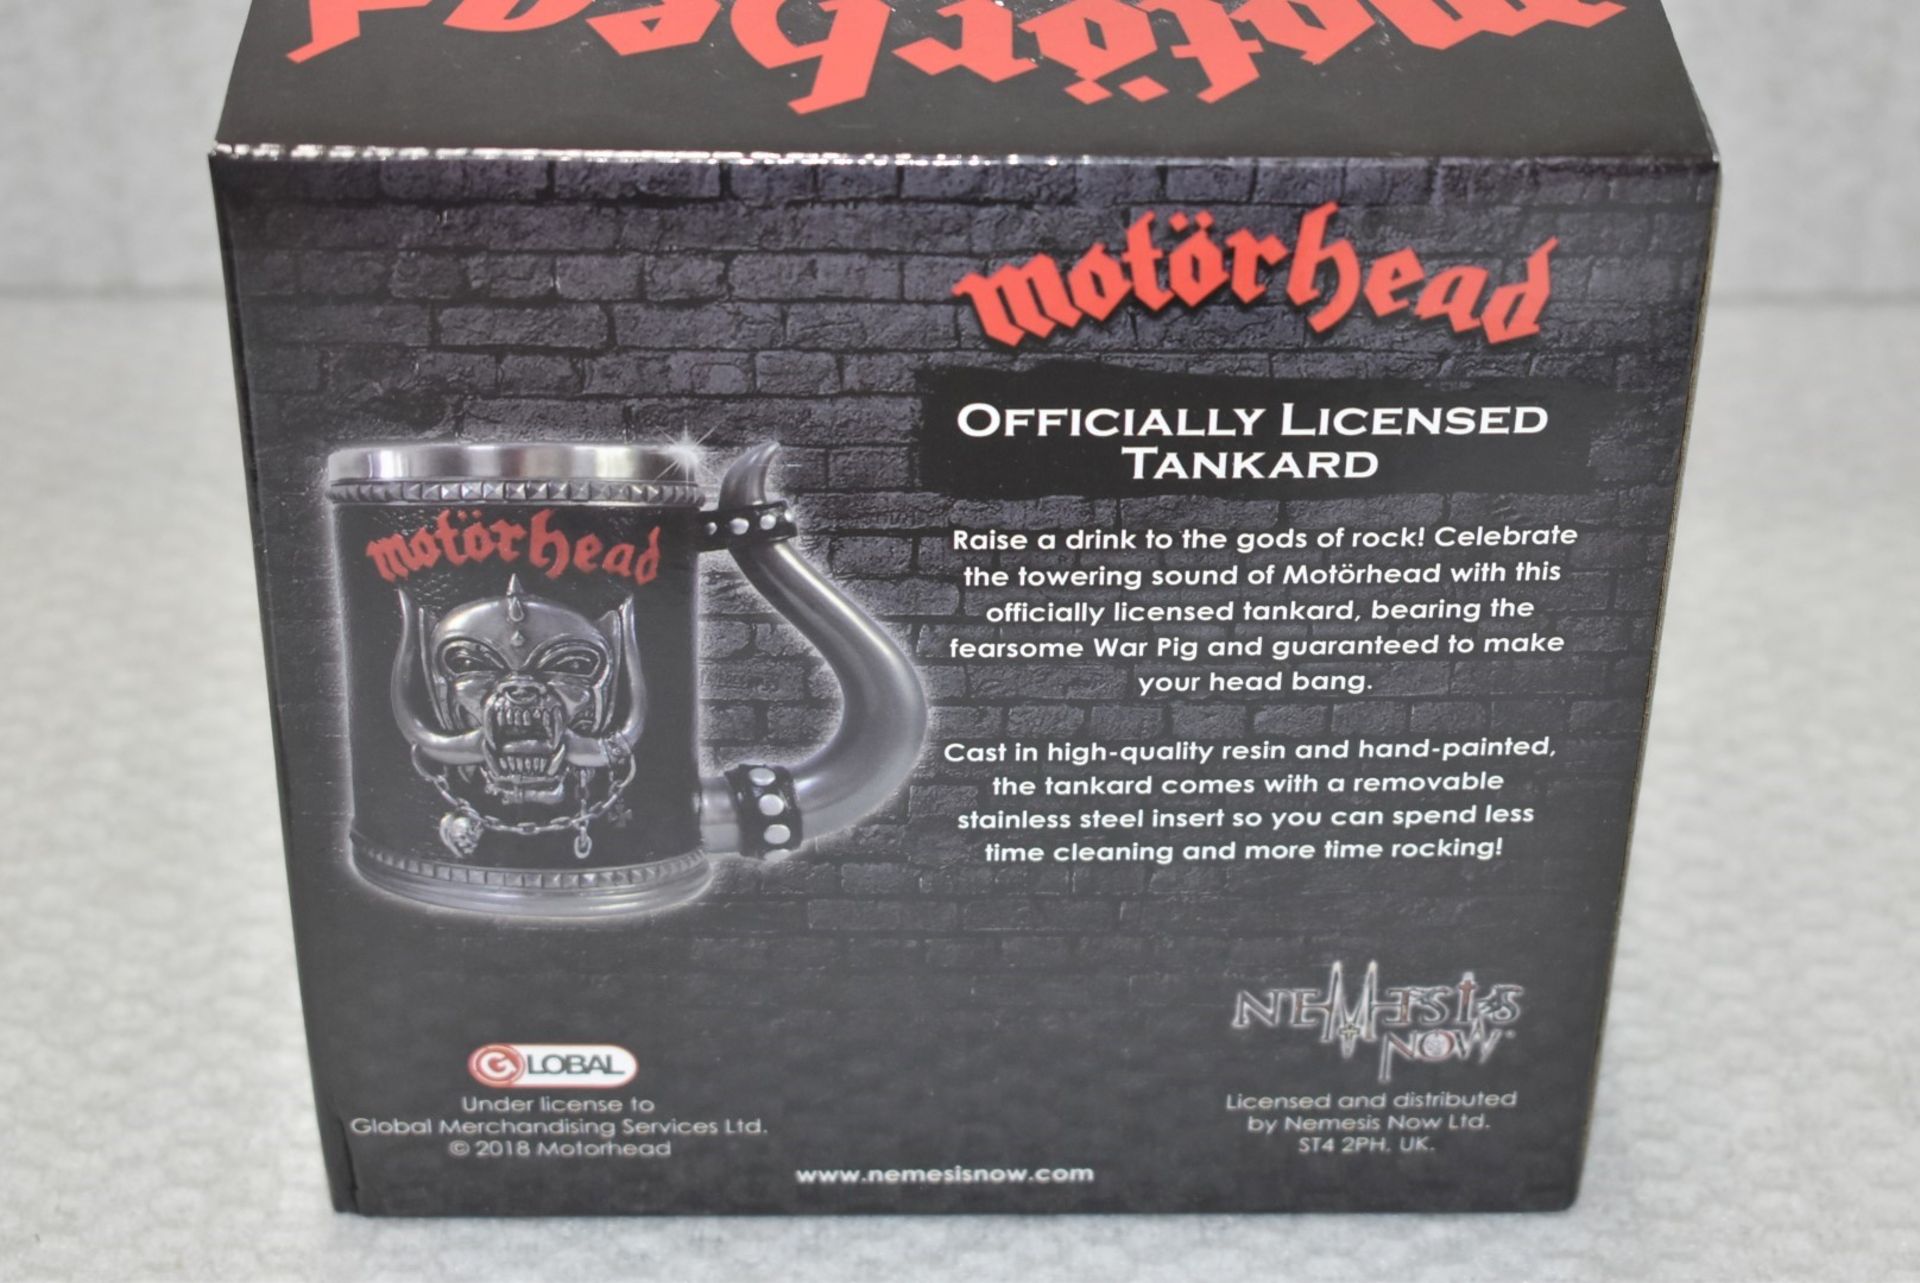 1 x Motorhead Drinks Tanker By Nemesis Now - Features Detailed Warpig Sculpture, Hand Painted - Image 6 of 11